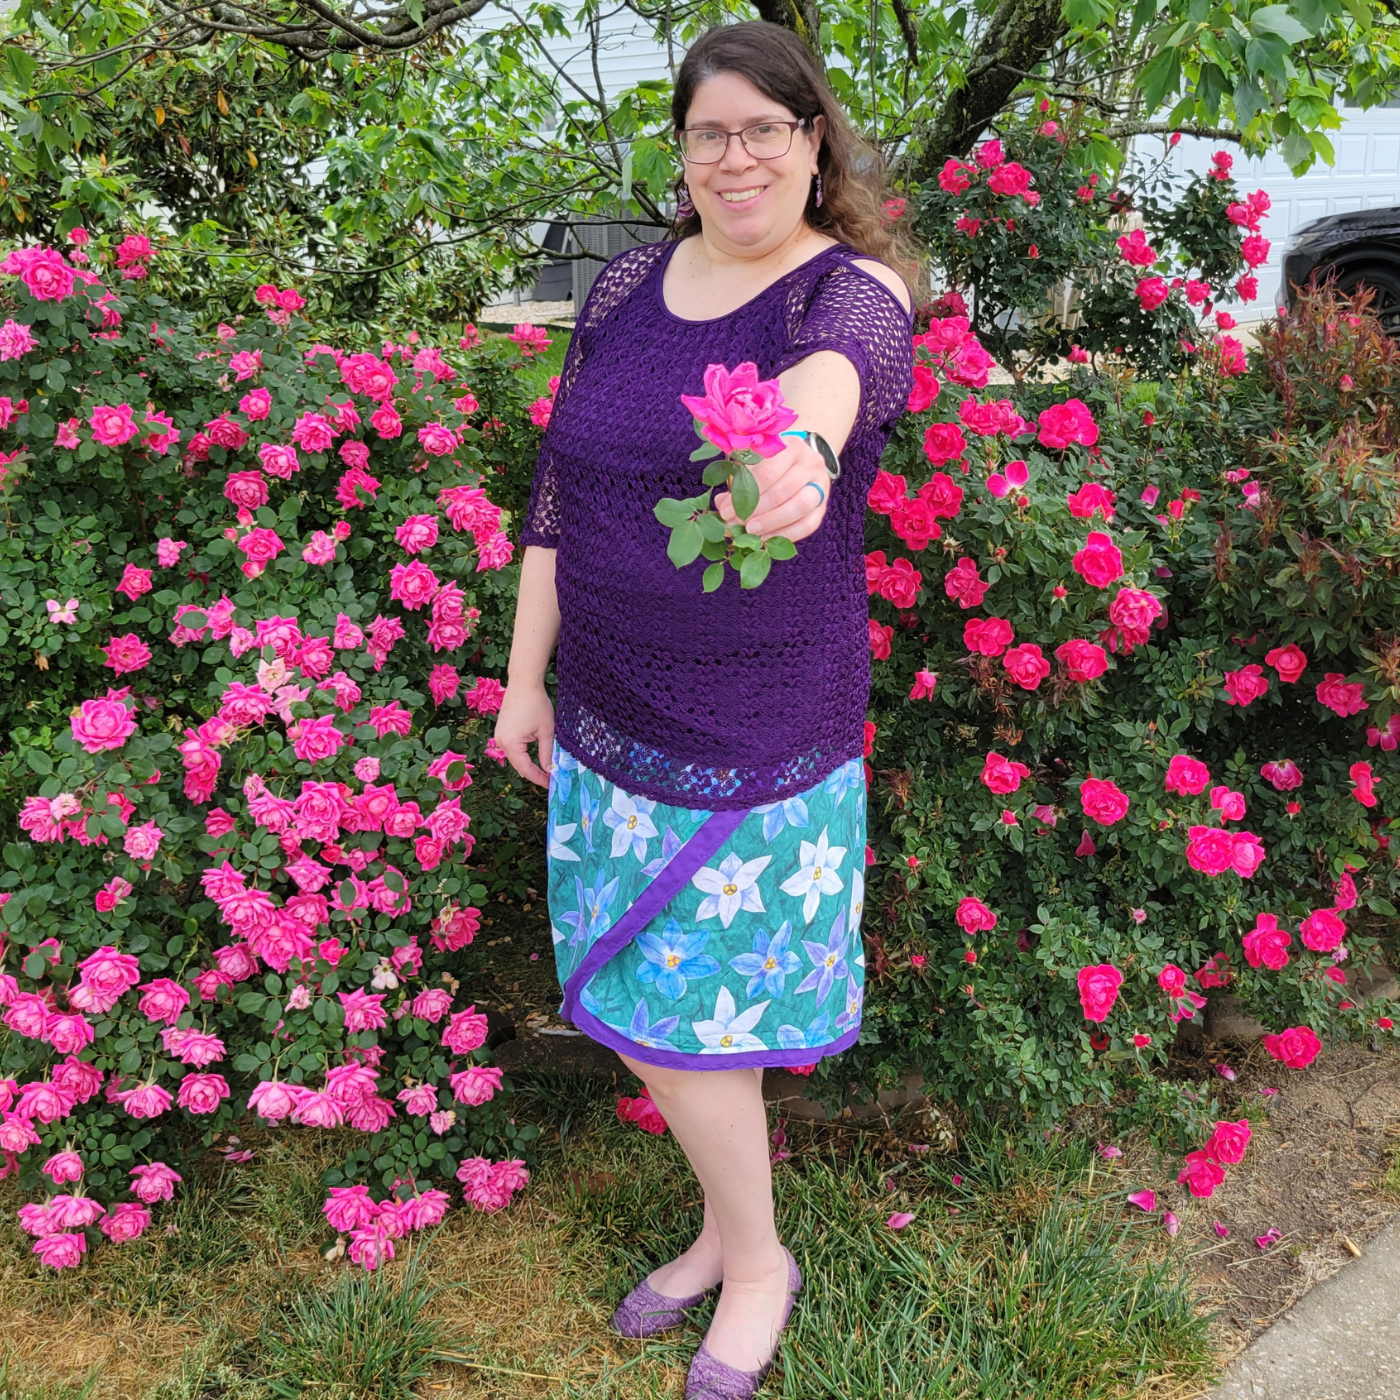 Sharon smiles and holds out a hot pink rose toward the camera. She is wearing a purple crochet top and tank top as well as a wrap skirt featuring a design with large purple, white and blue starflowers. The skirt has a strip of purple fabric along the hem and on the wrapped section part of the fabric, which goes diagonally down the front of the skirt.